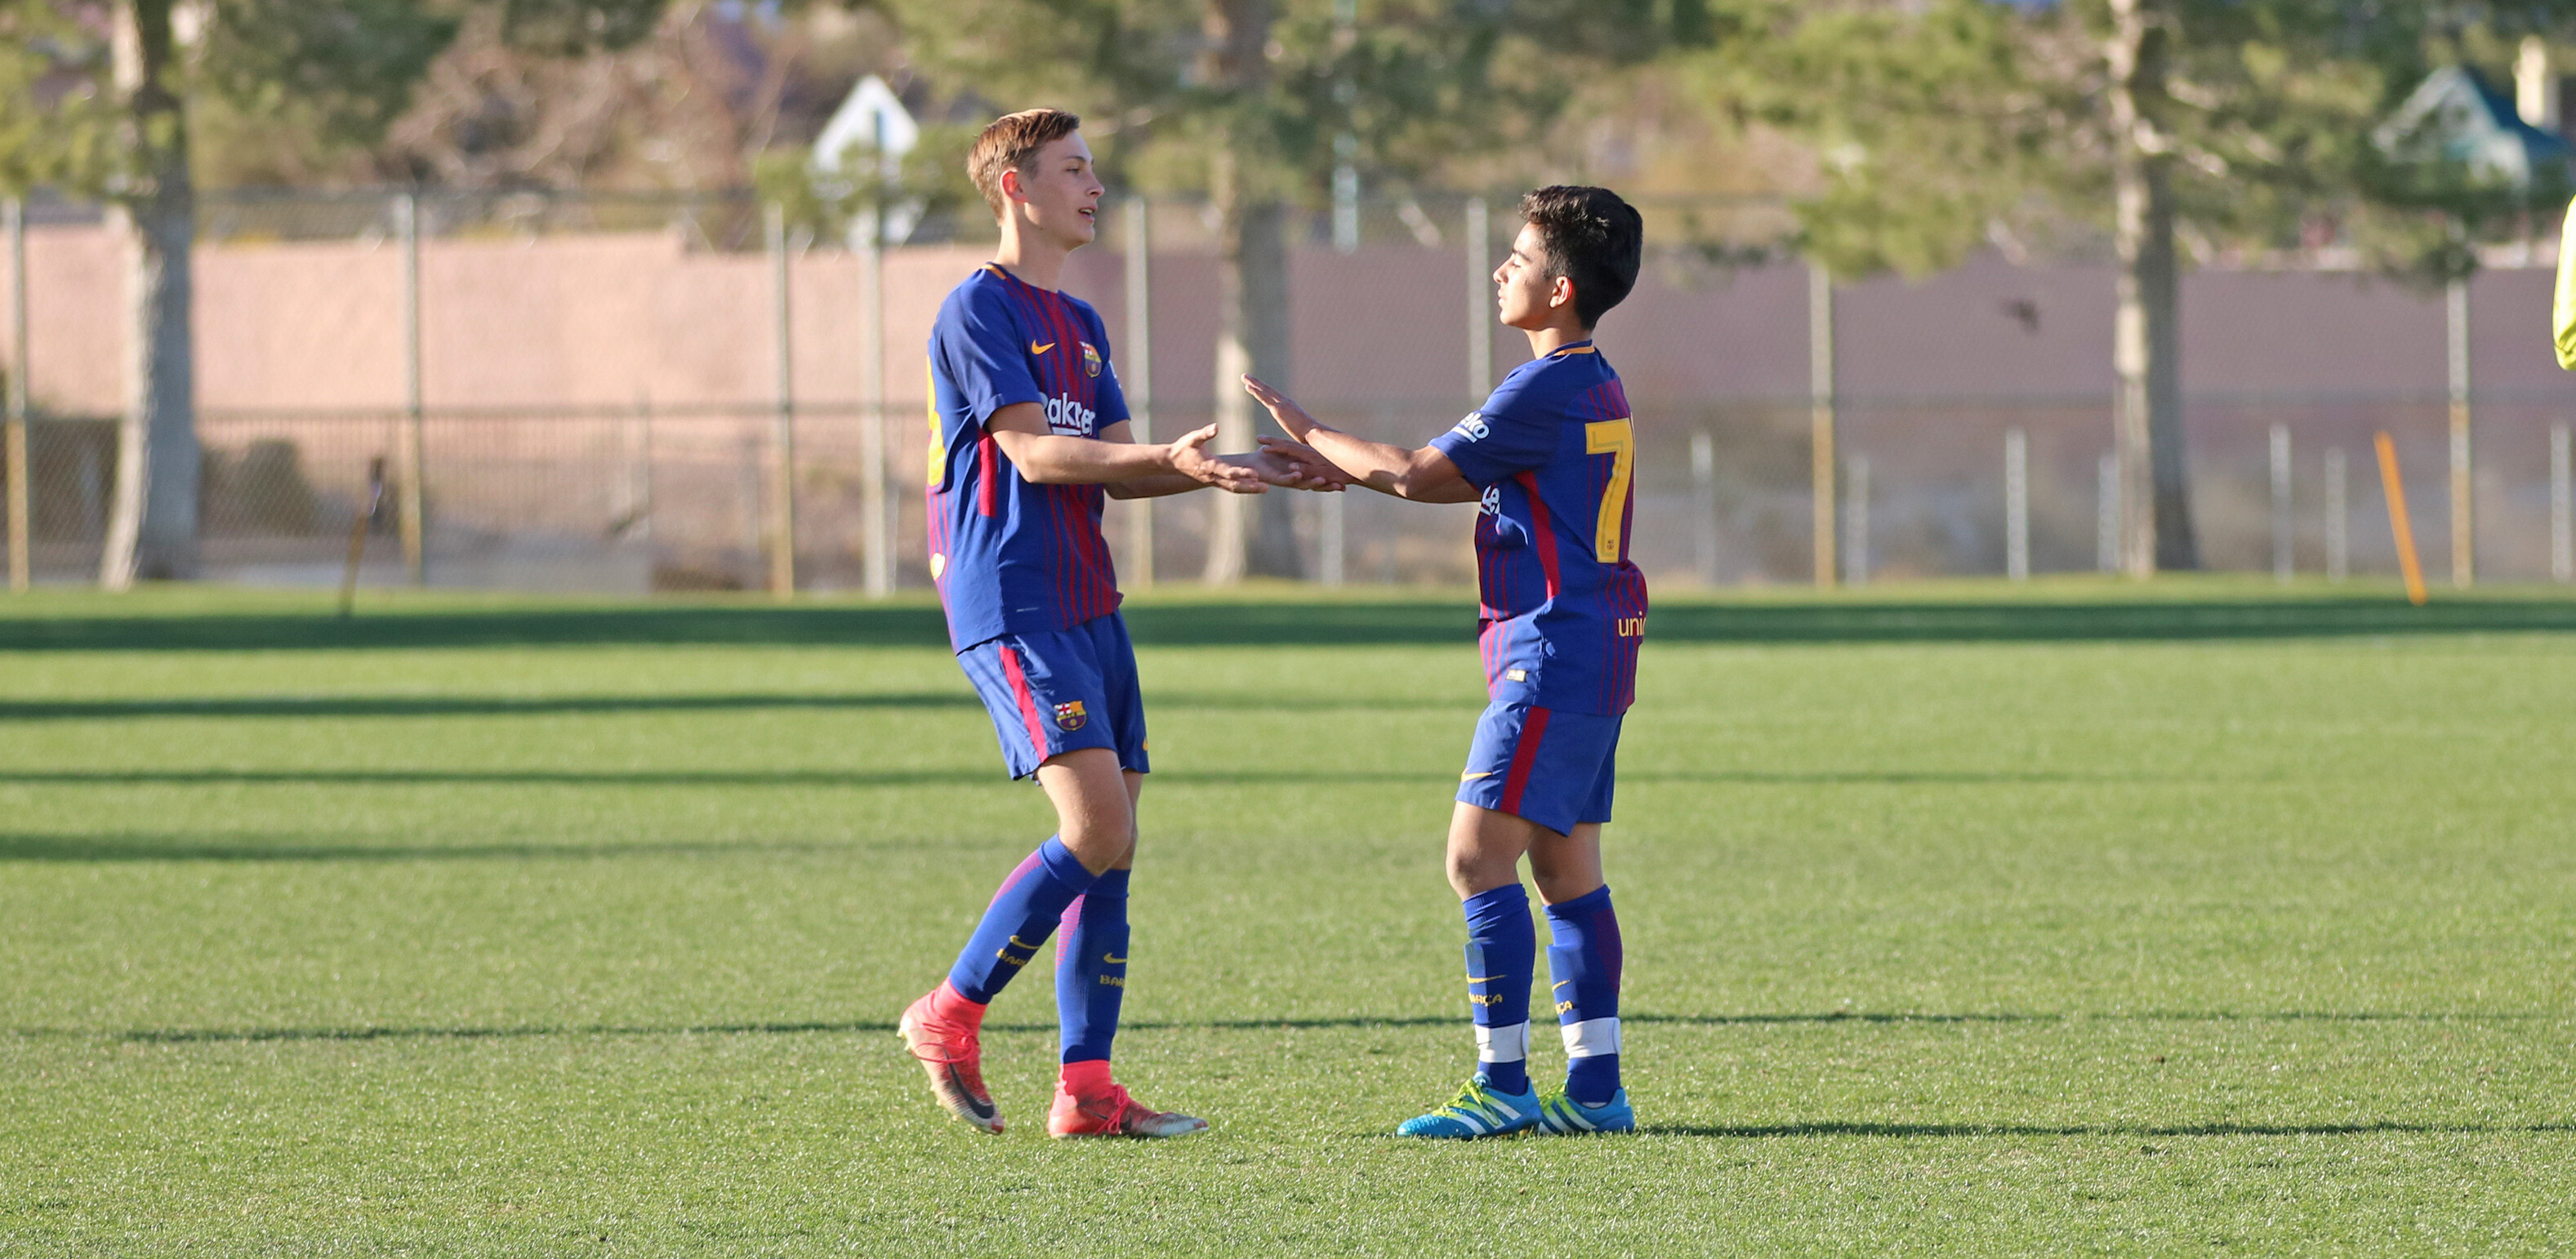 Barca Academy Players - Garrett and Isael celebrating after winning the 2018 Las Vegas Mayors Cup International Tournament Championship